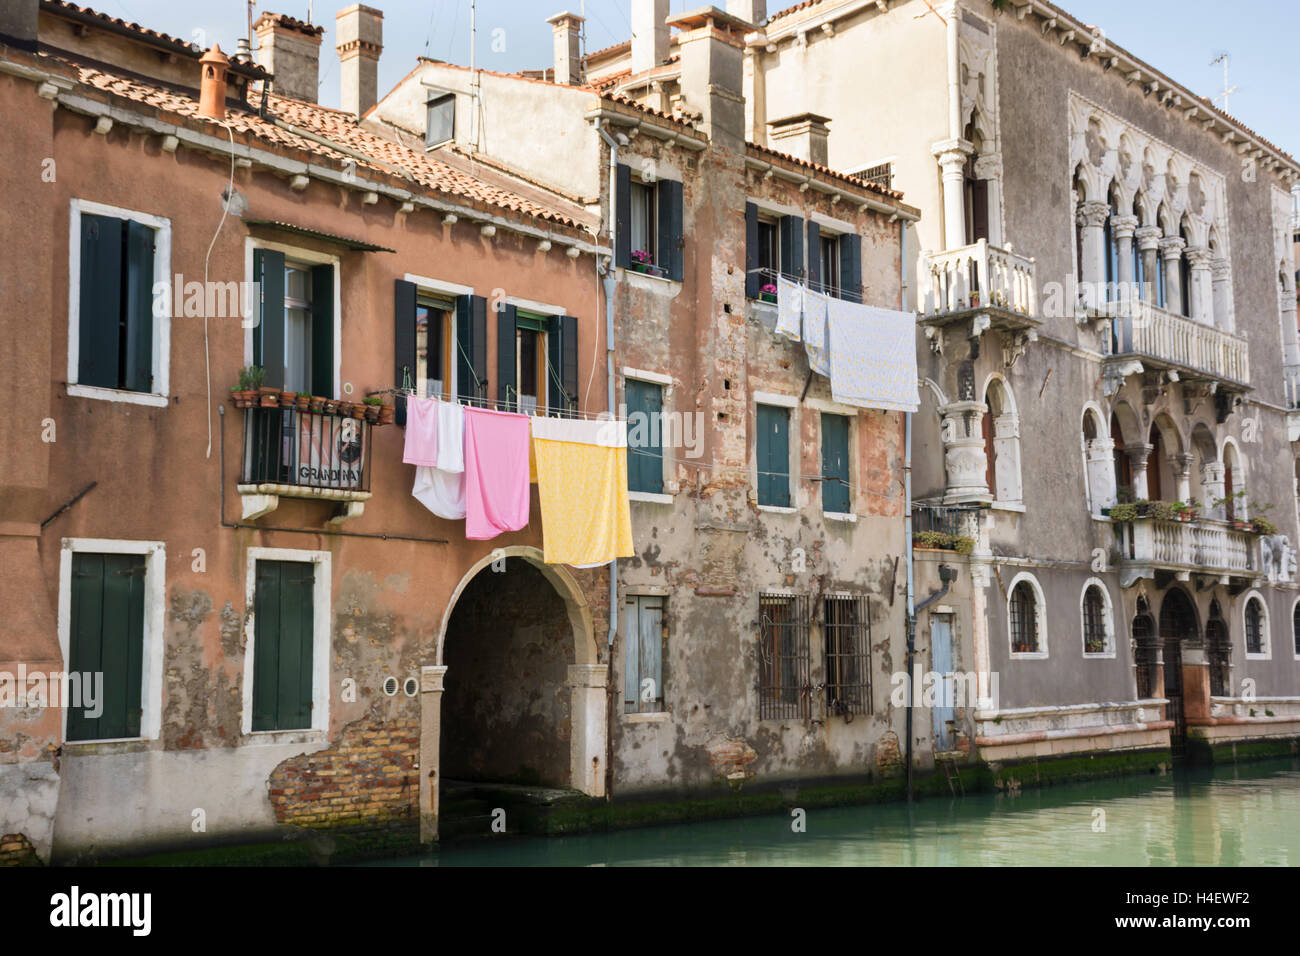 A Venice canal with hanging clothes. Venice, Italy, Europe Stock Photo